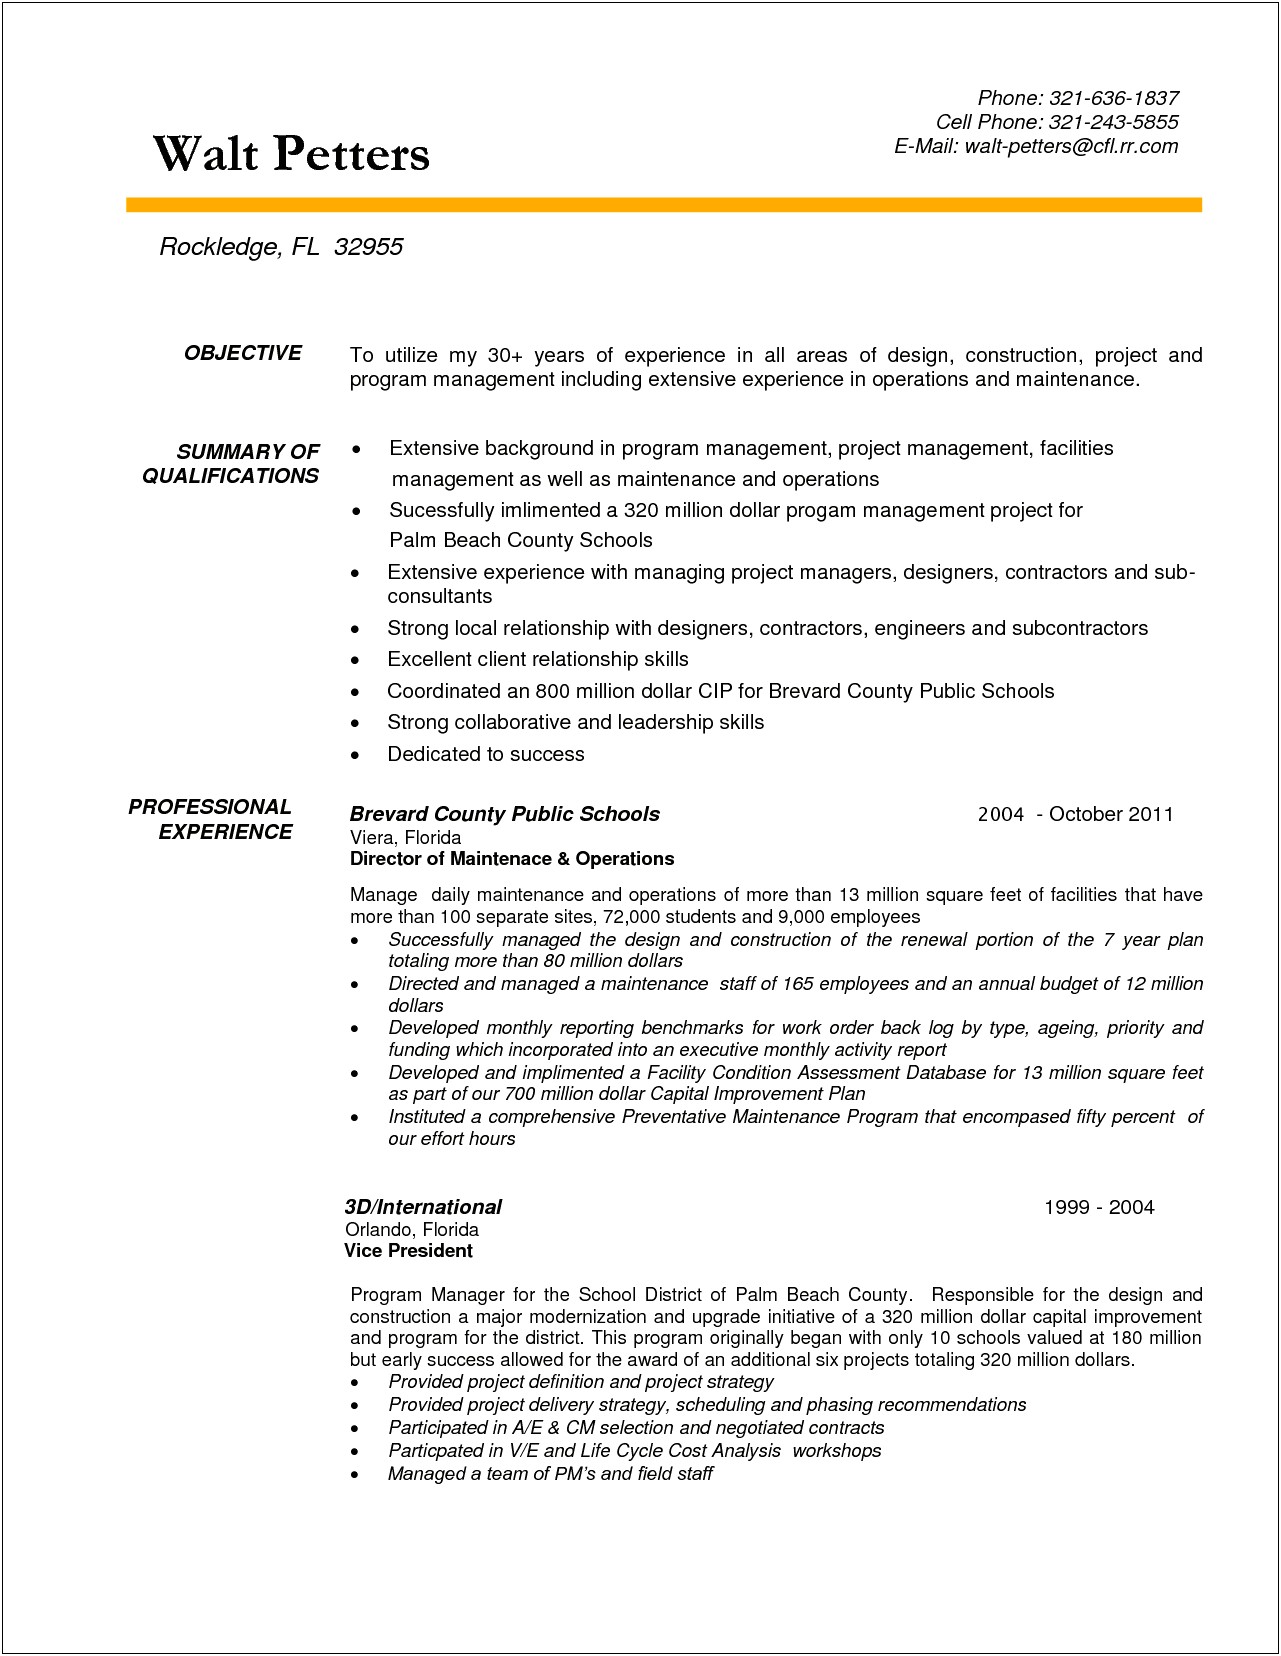 Resume Summary For Construction Manager